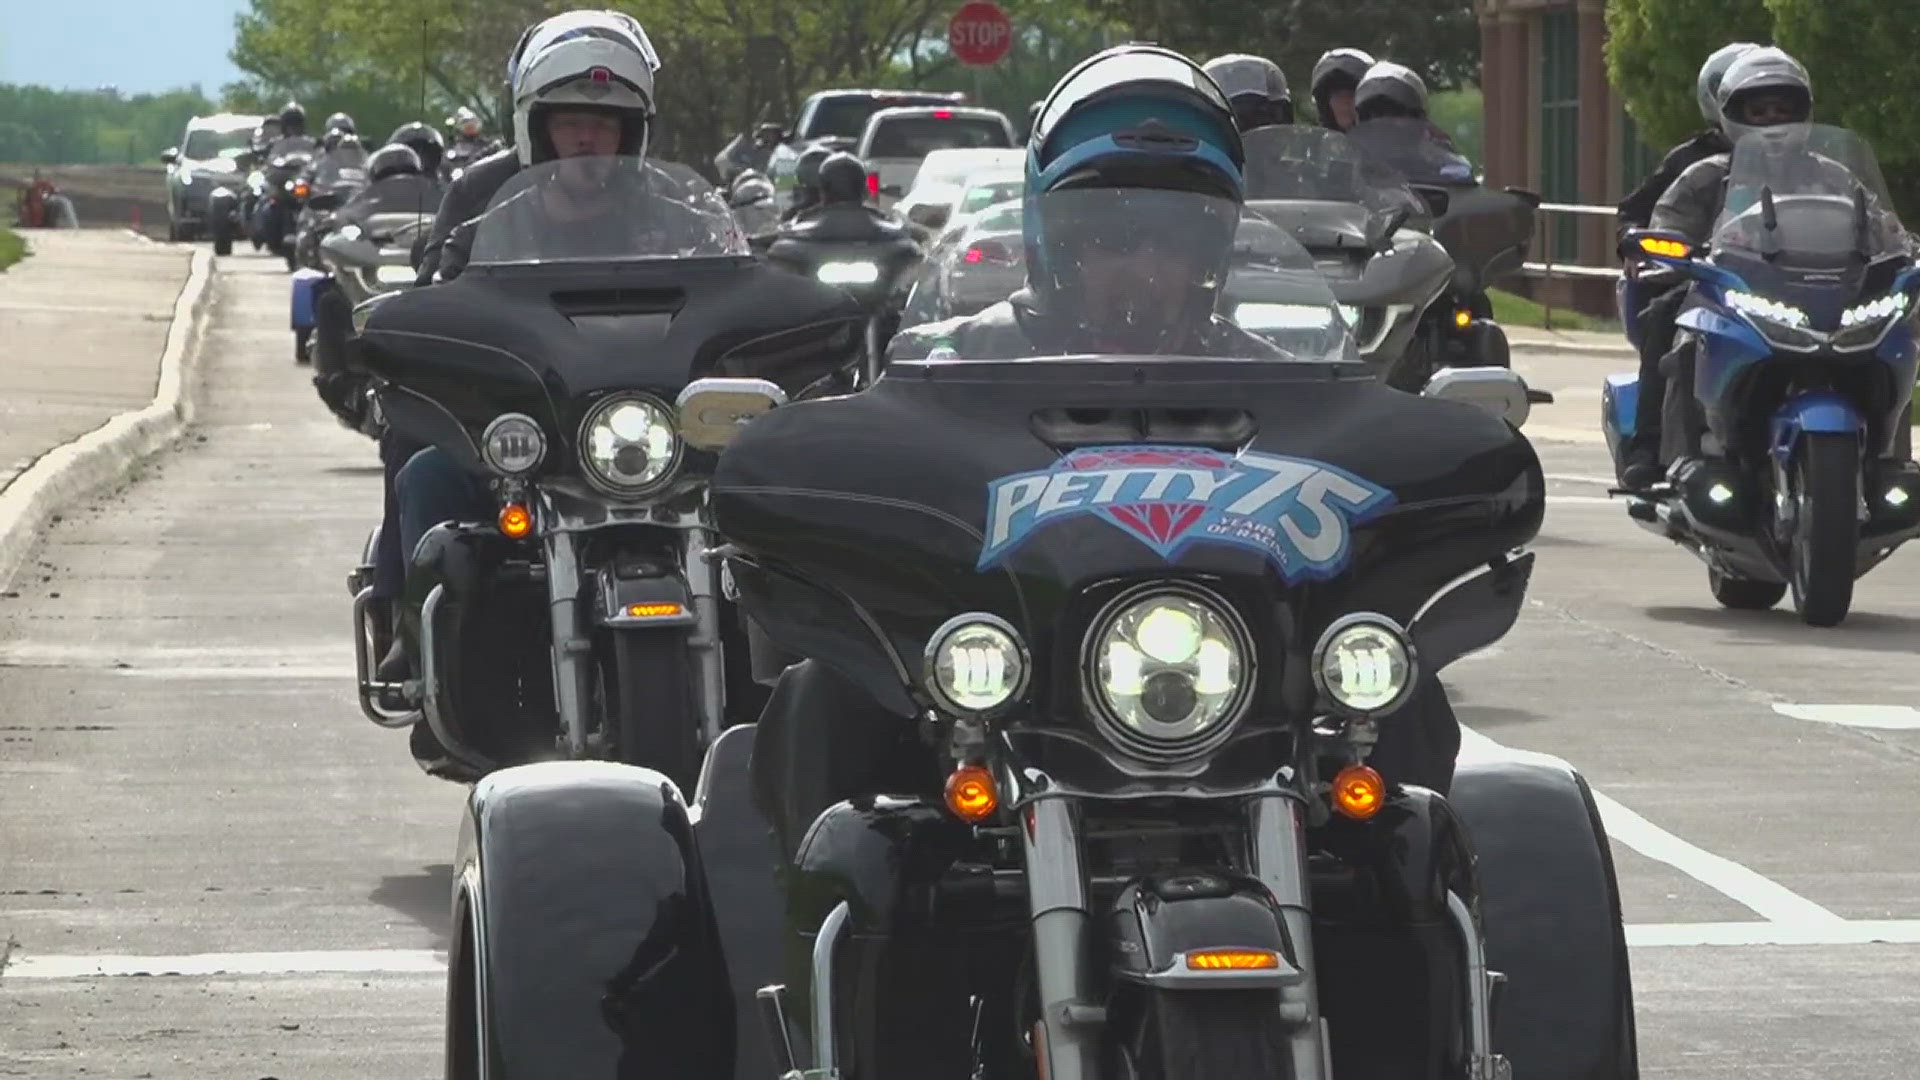 The annual ride raises money for Victory Junction, a summer camp for kids with serious medical conditions and chronic illnesses.